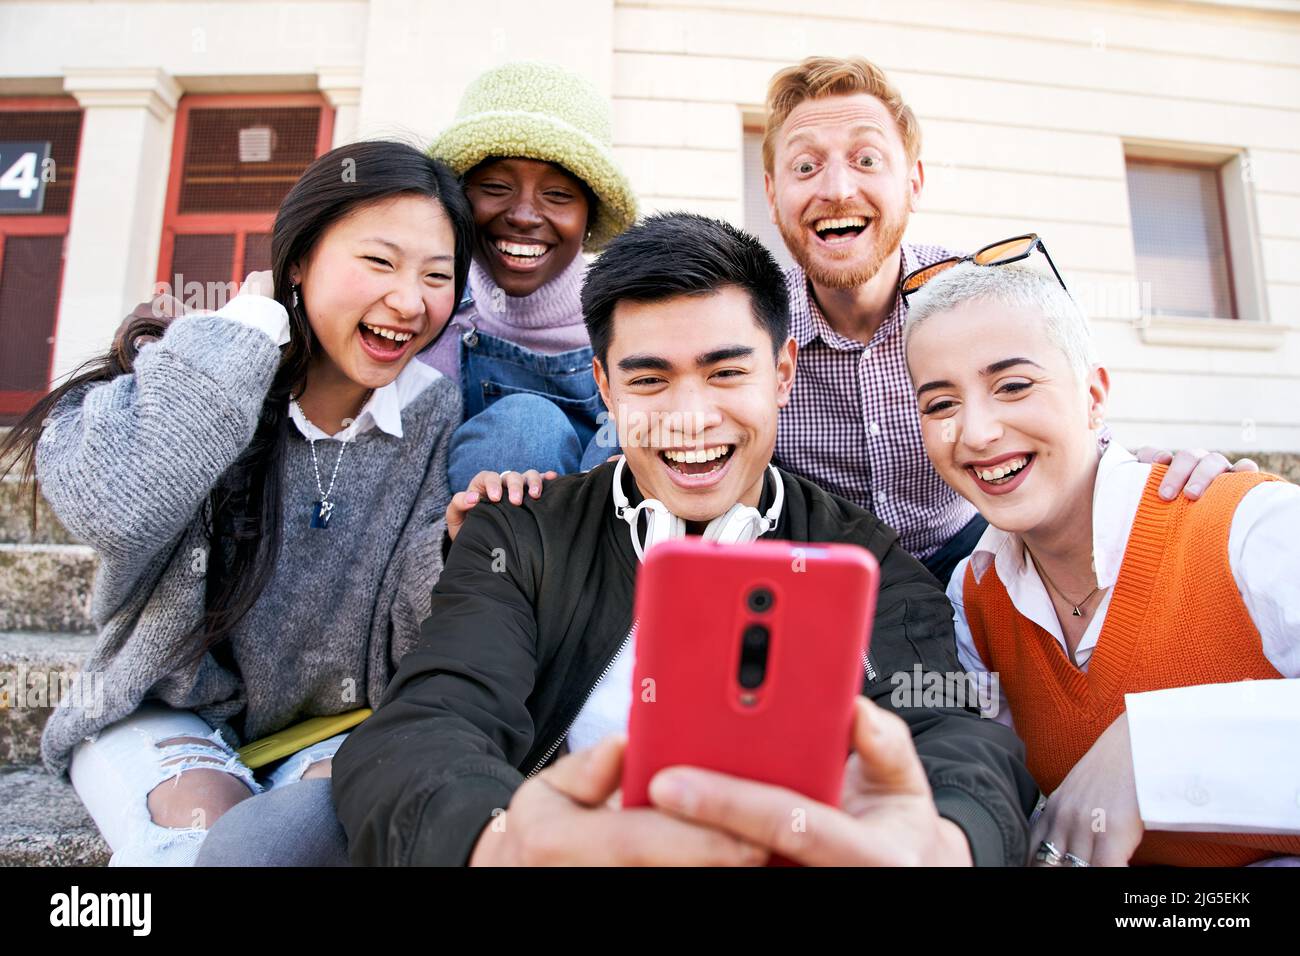 Group of Smiling people using mobile phone outdoors. Cheerful guys and girls friends having fun watching something at digital display. Happy vacations Stock Photo